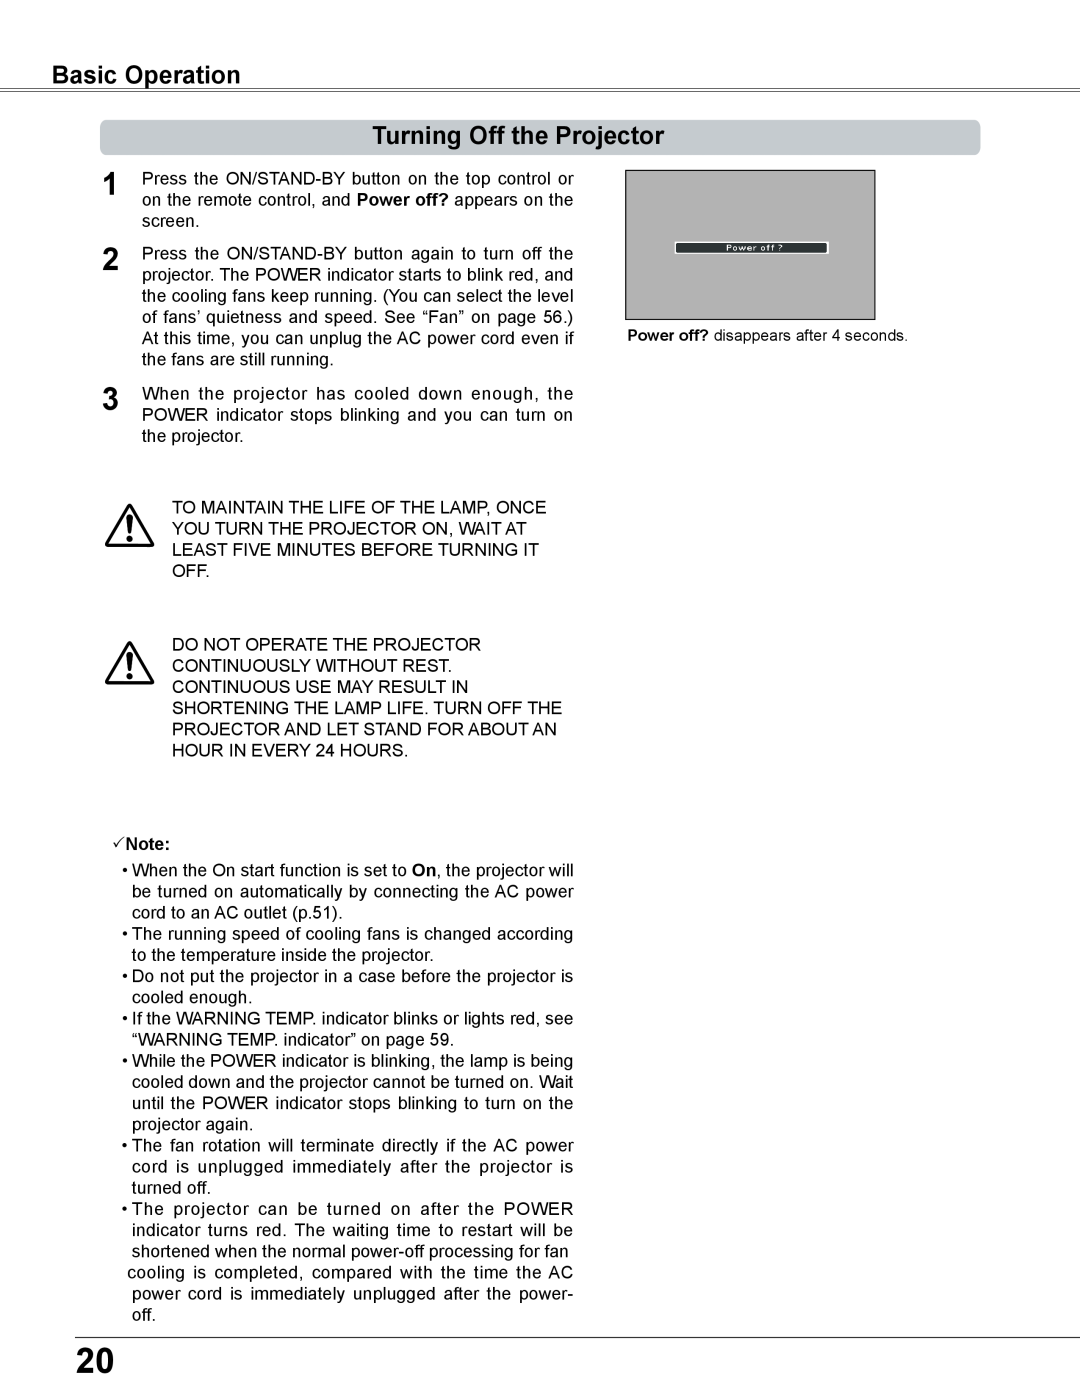 Sanyo PLC-XC56 owner manual Turning Off the Projector, Basic Operation, Note, Power off? disappears after 4 seconds 